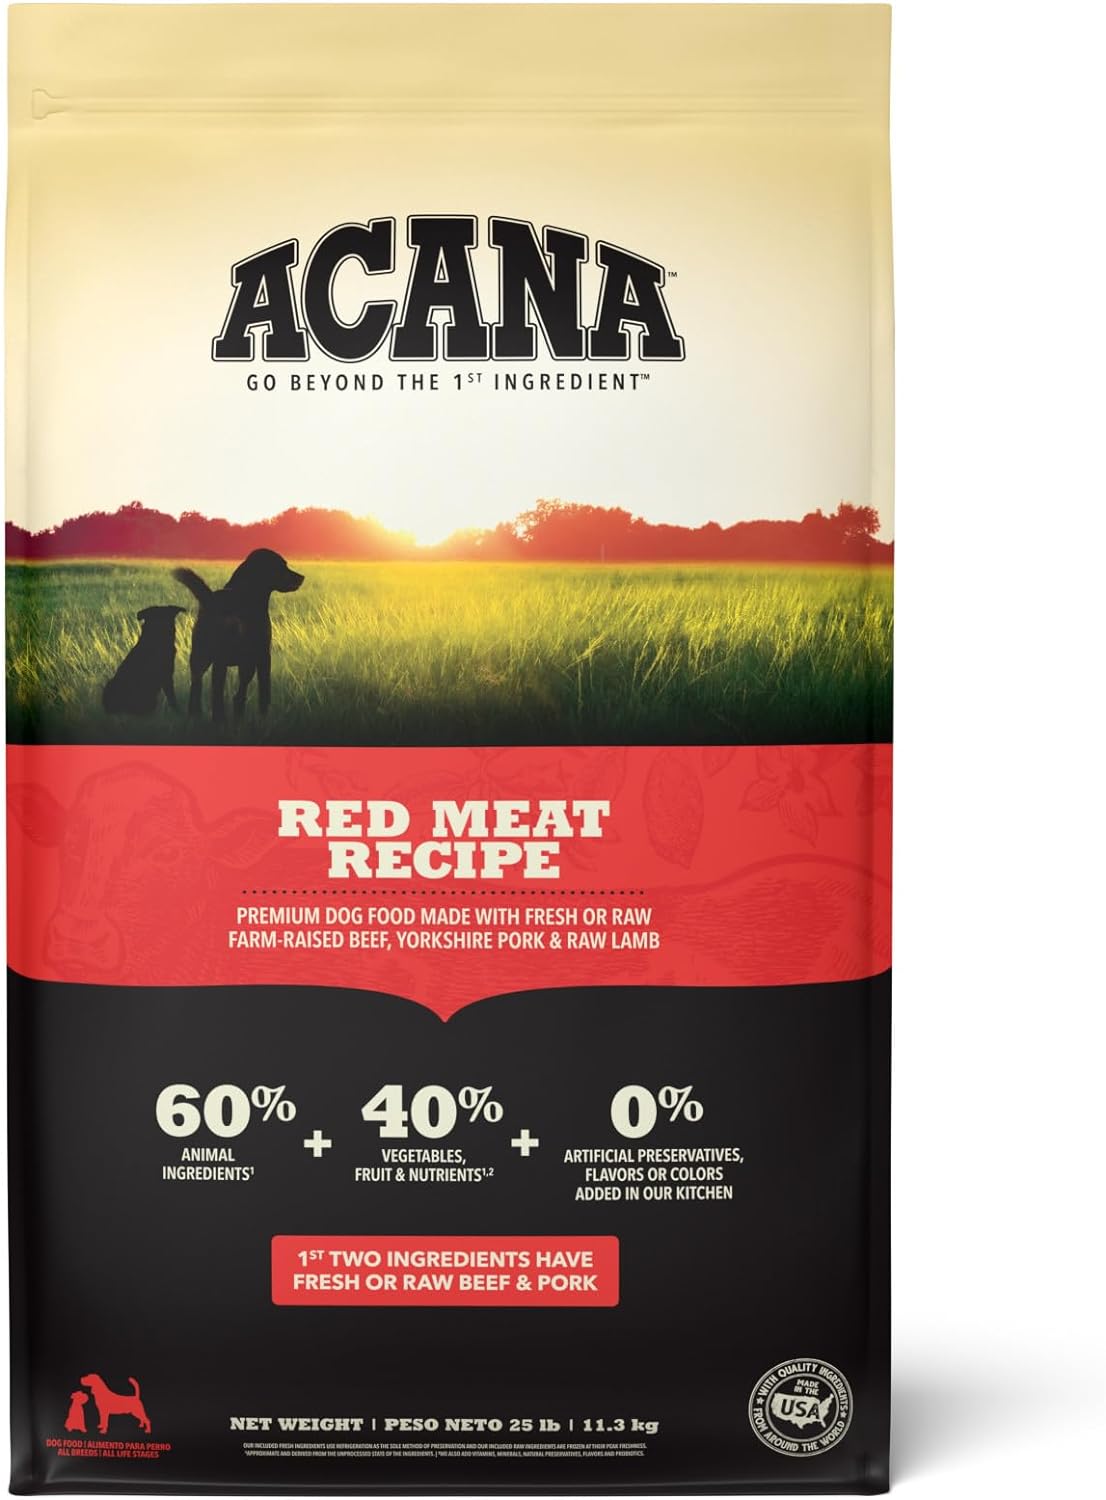 Acana Red Meat Recipe Dry Dog Food – Gallery Image 1